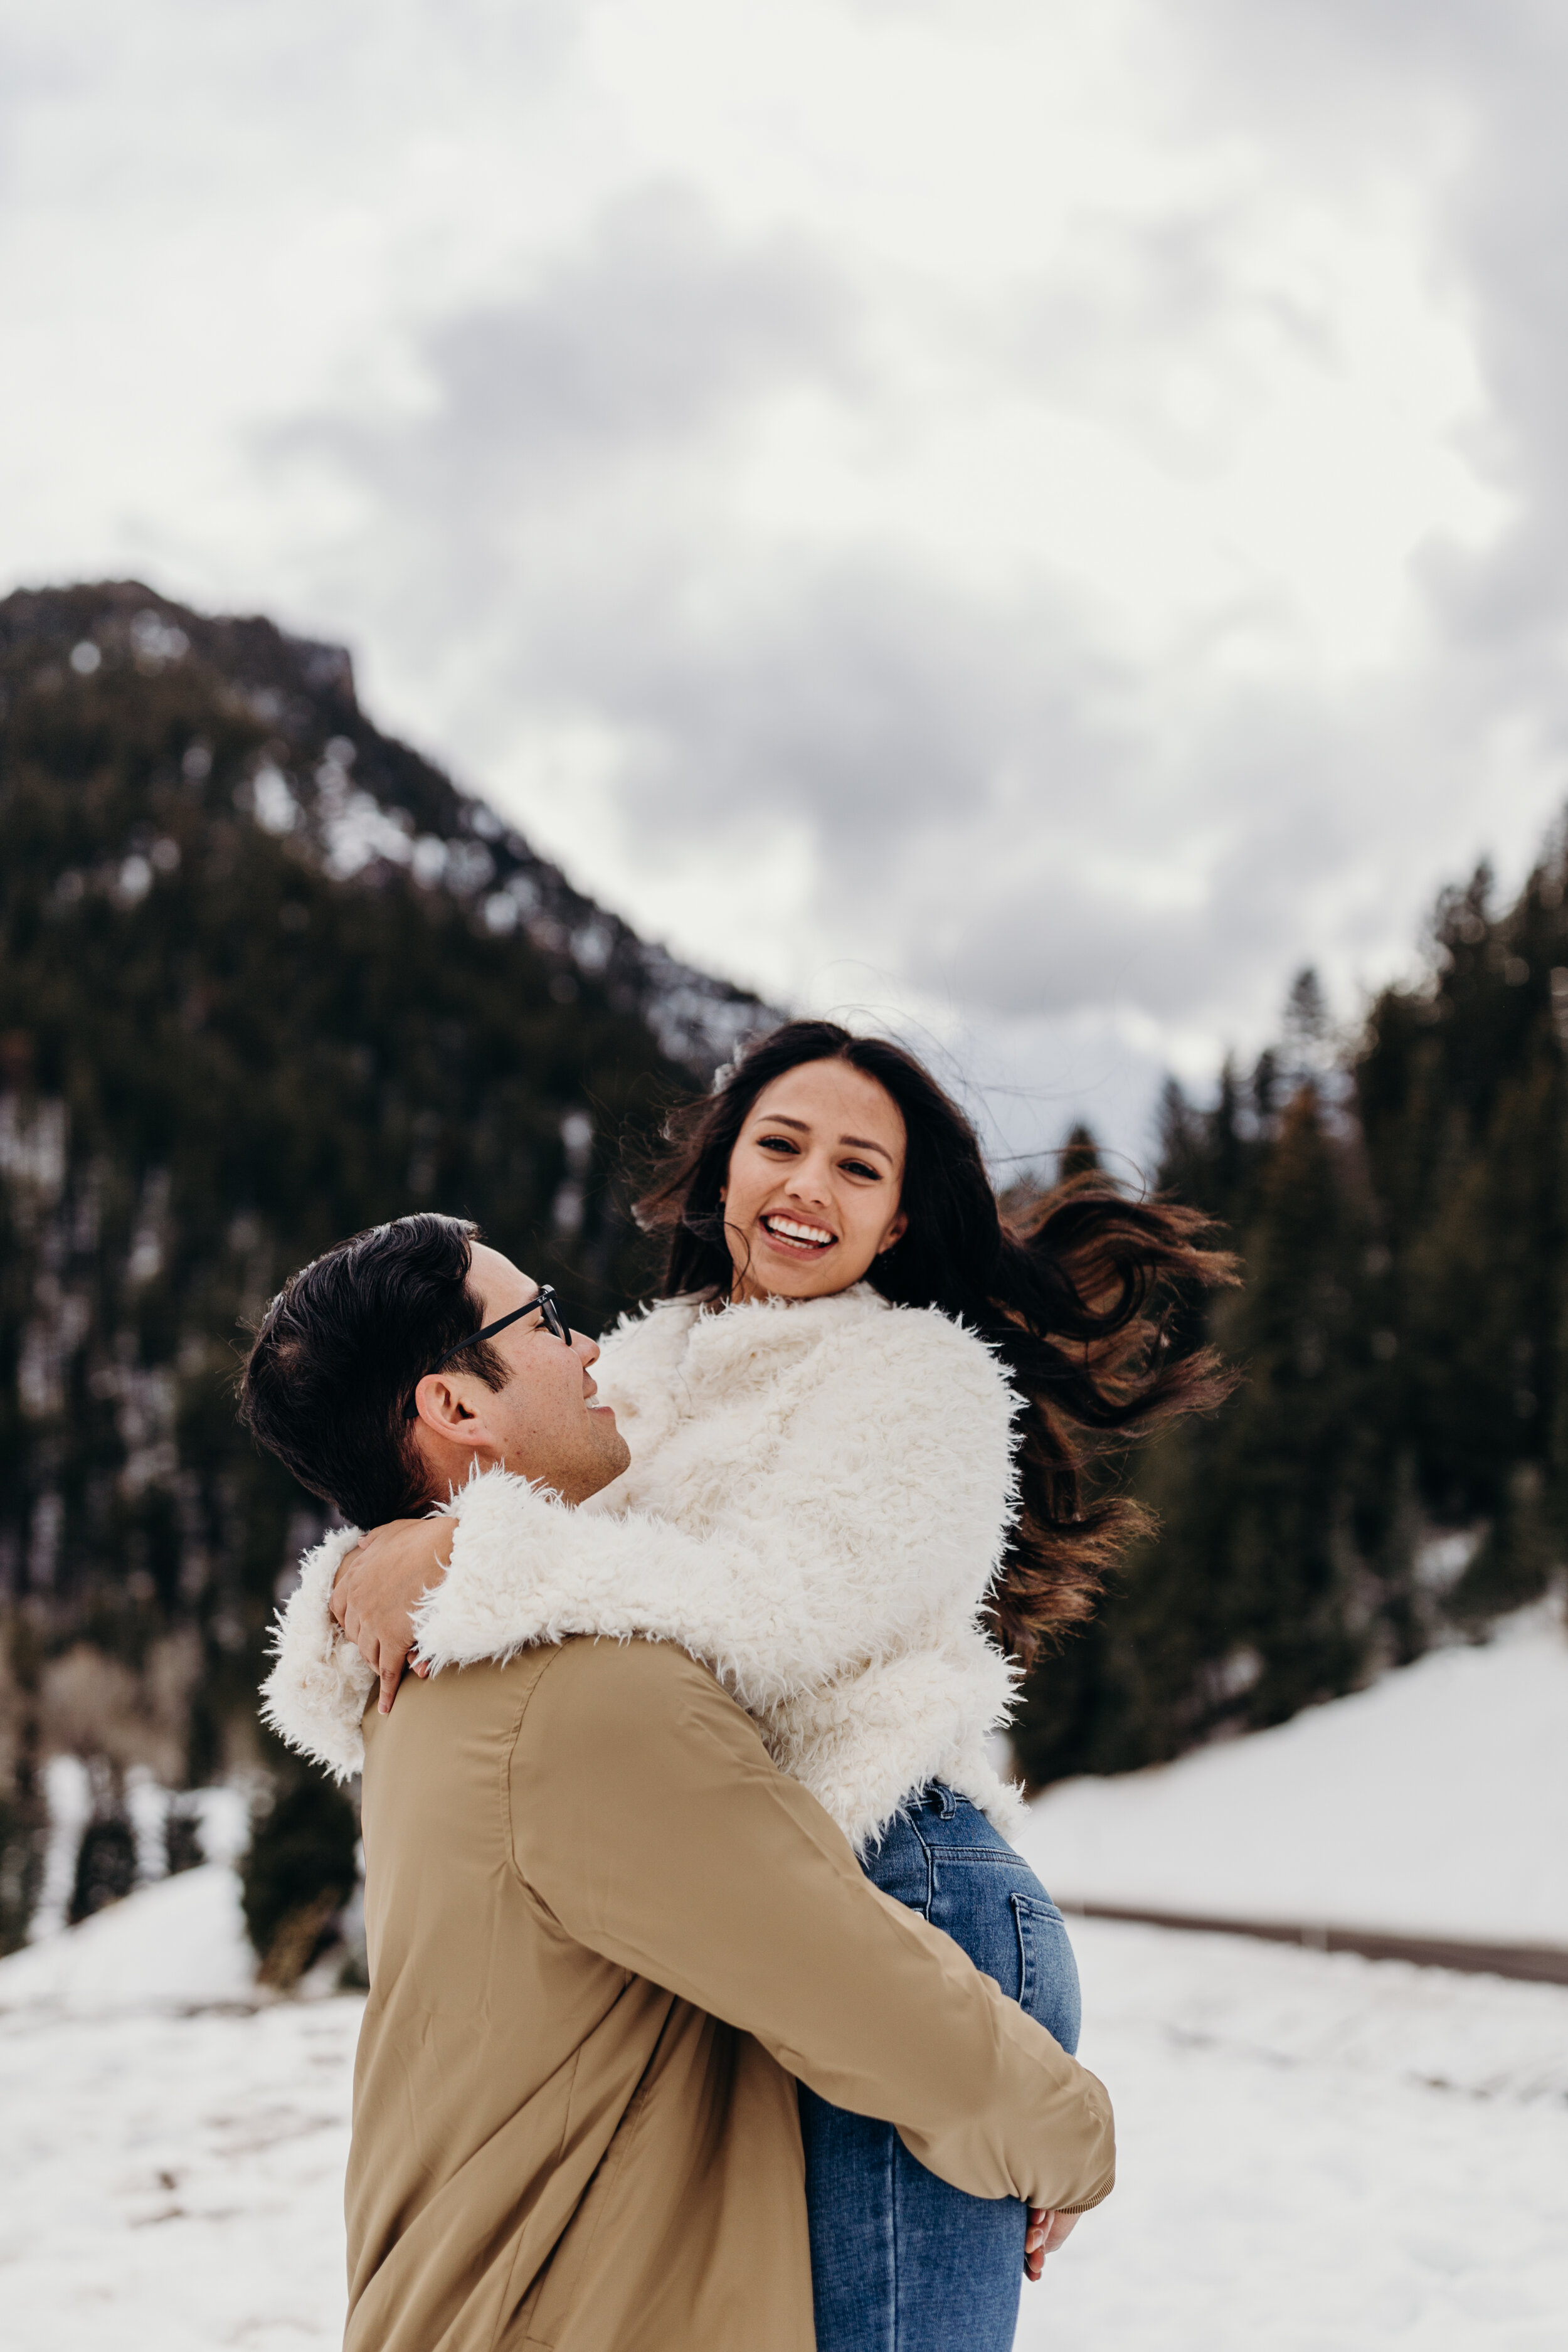 Cozy winter couple shoot snowy mountains engagement session photoshoot #coupleshoot #engagements #engagementshoot #weddingphotographer #utahphotographer guy picking up girl